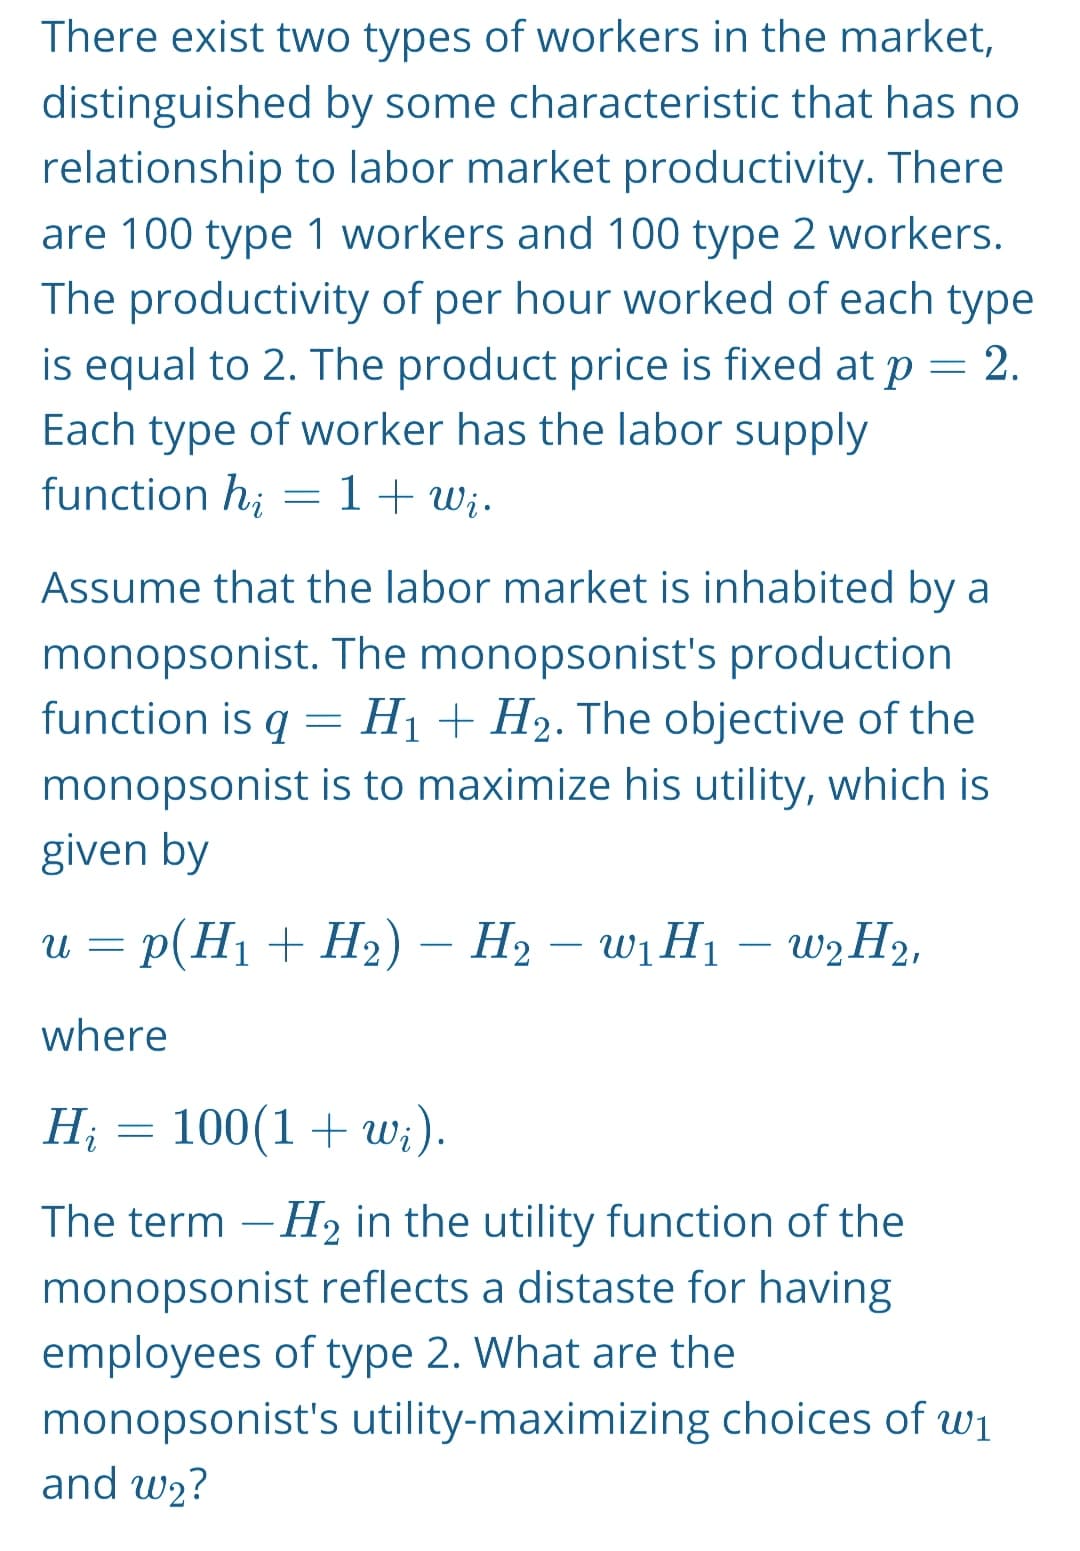 There exist two types of workers in the market,
distinguished by some characteristic that has no
relationship to labor market productivity. There
are 100 type 1 workers and 100 type 2 workers.
The productivity of per hour worked of each type
is equal to 2. The product price is fixed at p
Each type of worker has the labor supply
function hi
1 + Wi.
=
2.
=
Assume that the labor market is inhabited by a
monopsonist. The monopsonist's production
function is q H₁ + H₂. The objective of the
monopsonist is to maximize his utility, which is
given by
=
u = p(H₁ + H₂) - H₂ - W₁ H₁ - W2 H₂,
where
H₂ = 100(1+w;).
Hi
The term -H₂ in the utility function of the
monopsonist reflects a distaste for having
employees of type 2. What are the
monopsonist's utility-maximizing choices of w₁
and w₂?